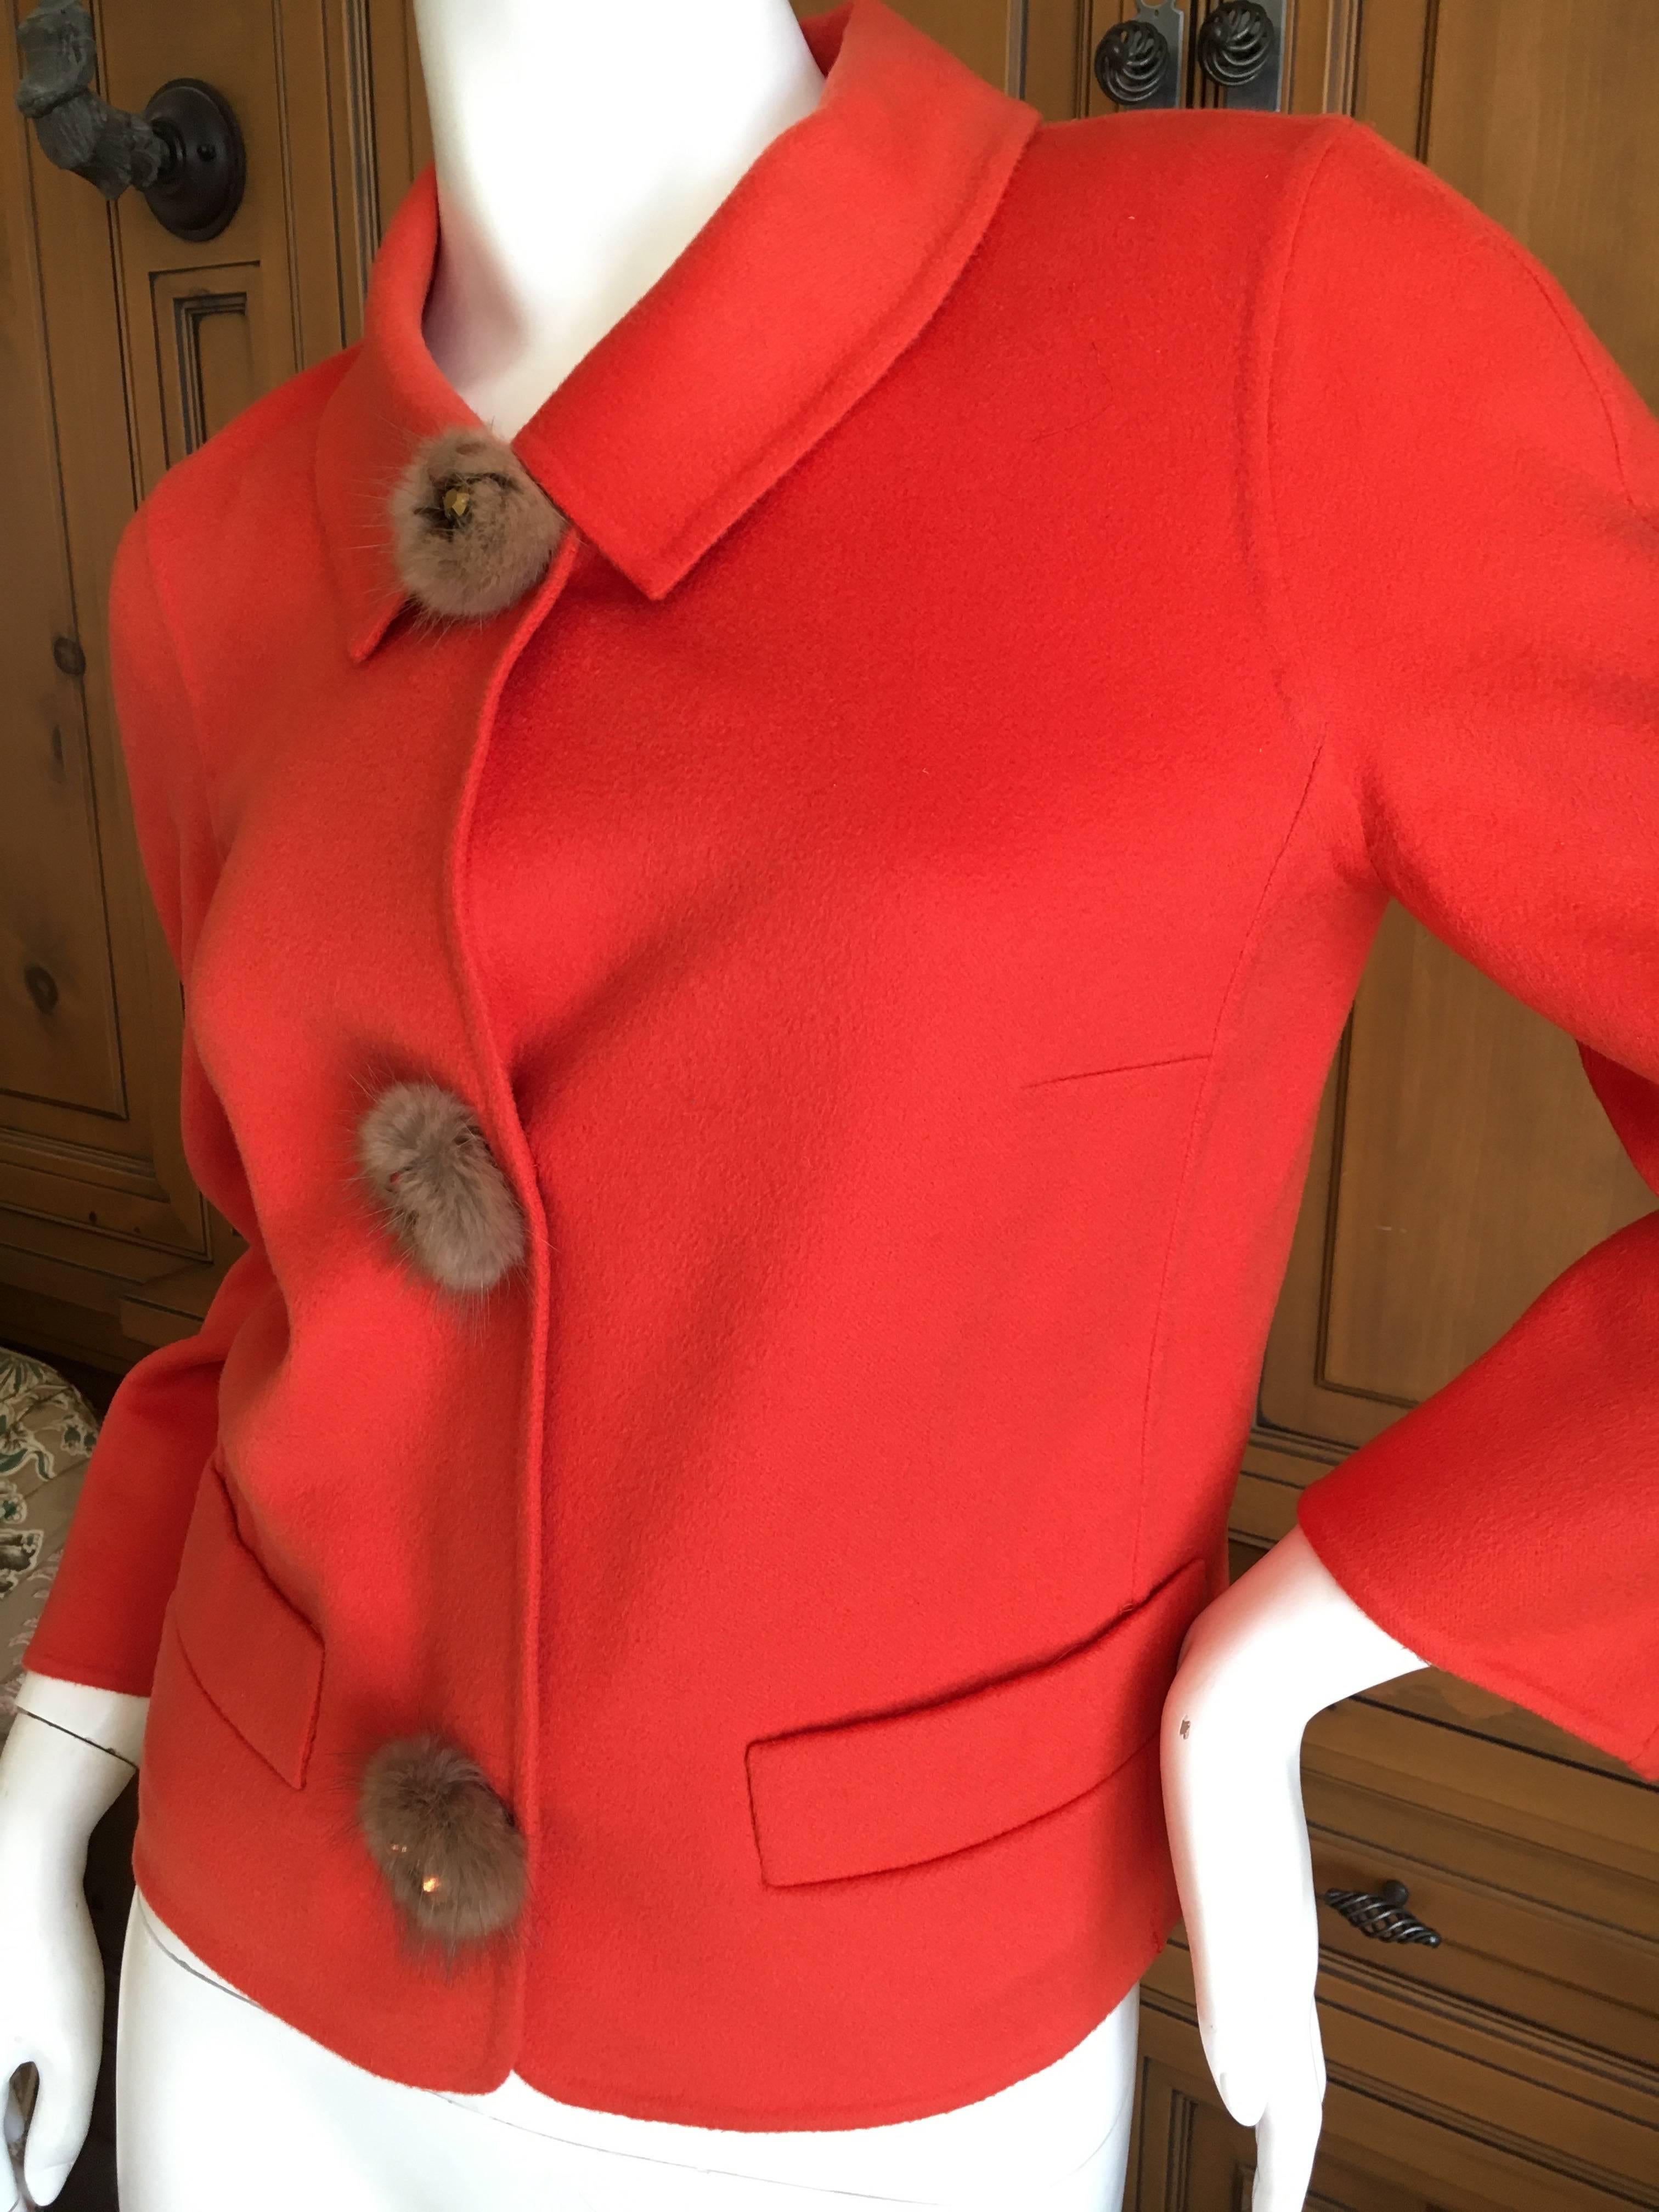 Christian Dior Doubleface Cashmere Jacket with Mink Jeweled Buttons.
Luxurious unlined pure cashmere with mink buttons, this is just divine.
Size 36
Bust 37